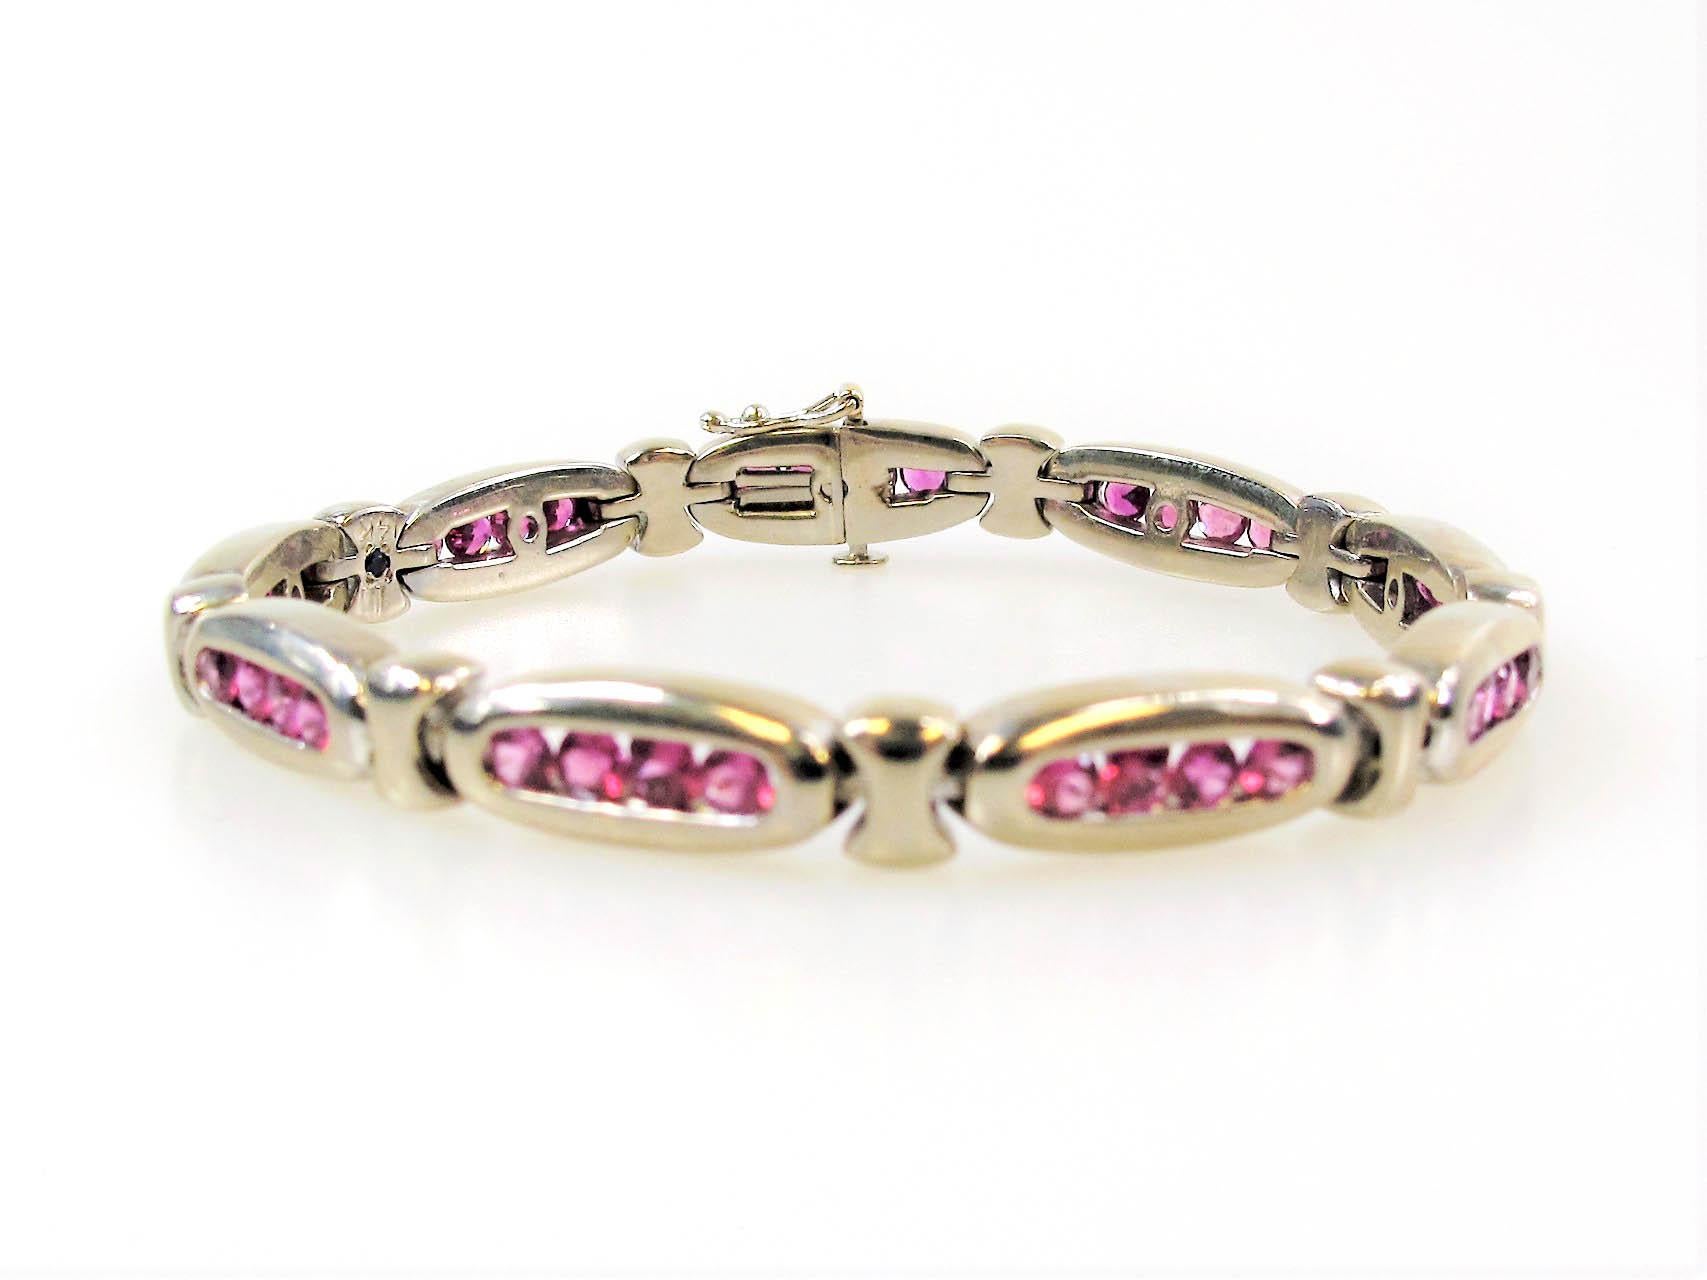 You'll be feeling pretty in pink wearing this incredible 5.00 carat ruby link bracelet! The unique magenta colored ruby stones really pop against the cool white gold in this modern elegant piece. 

This beautiful bracelet features an impressive 5.00